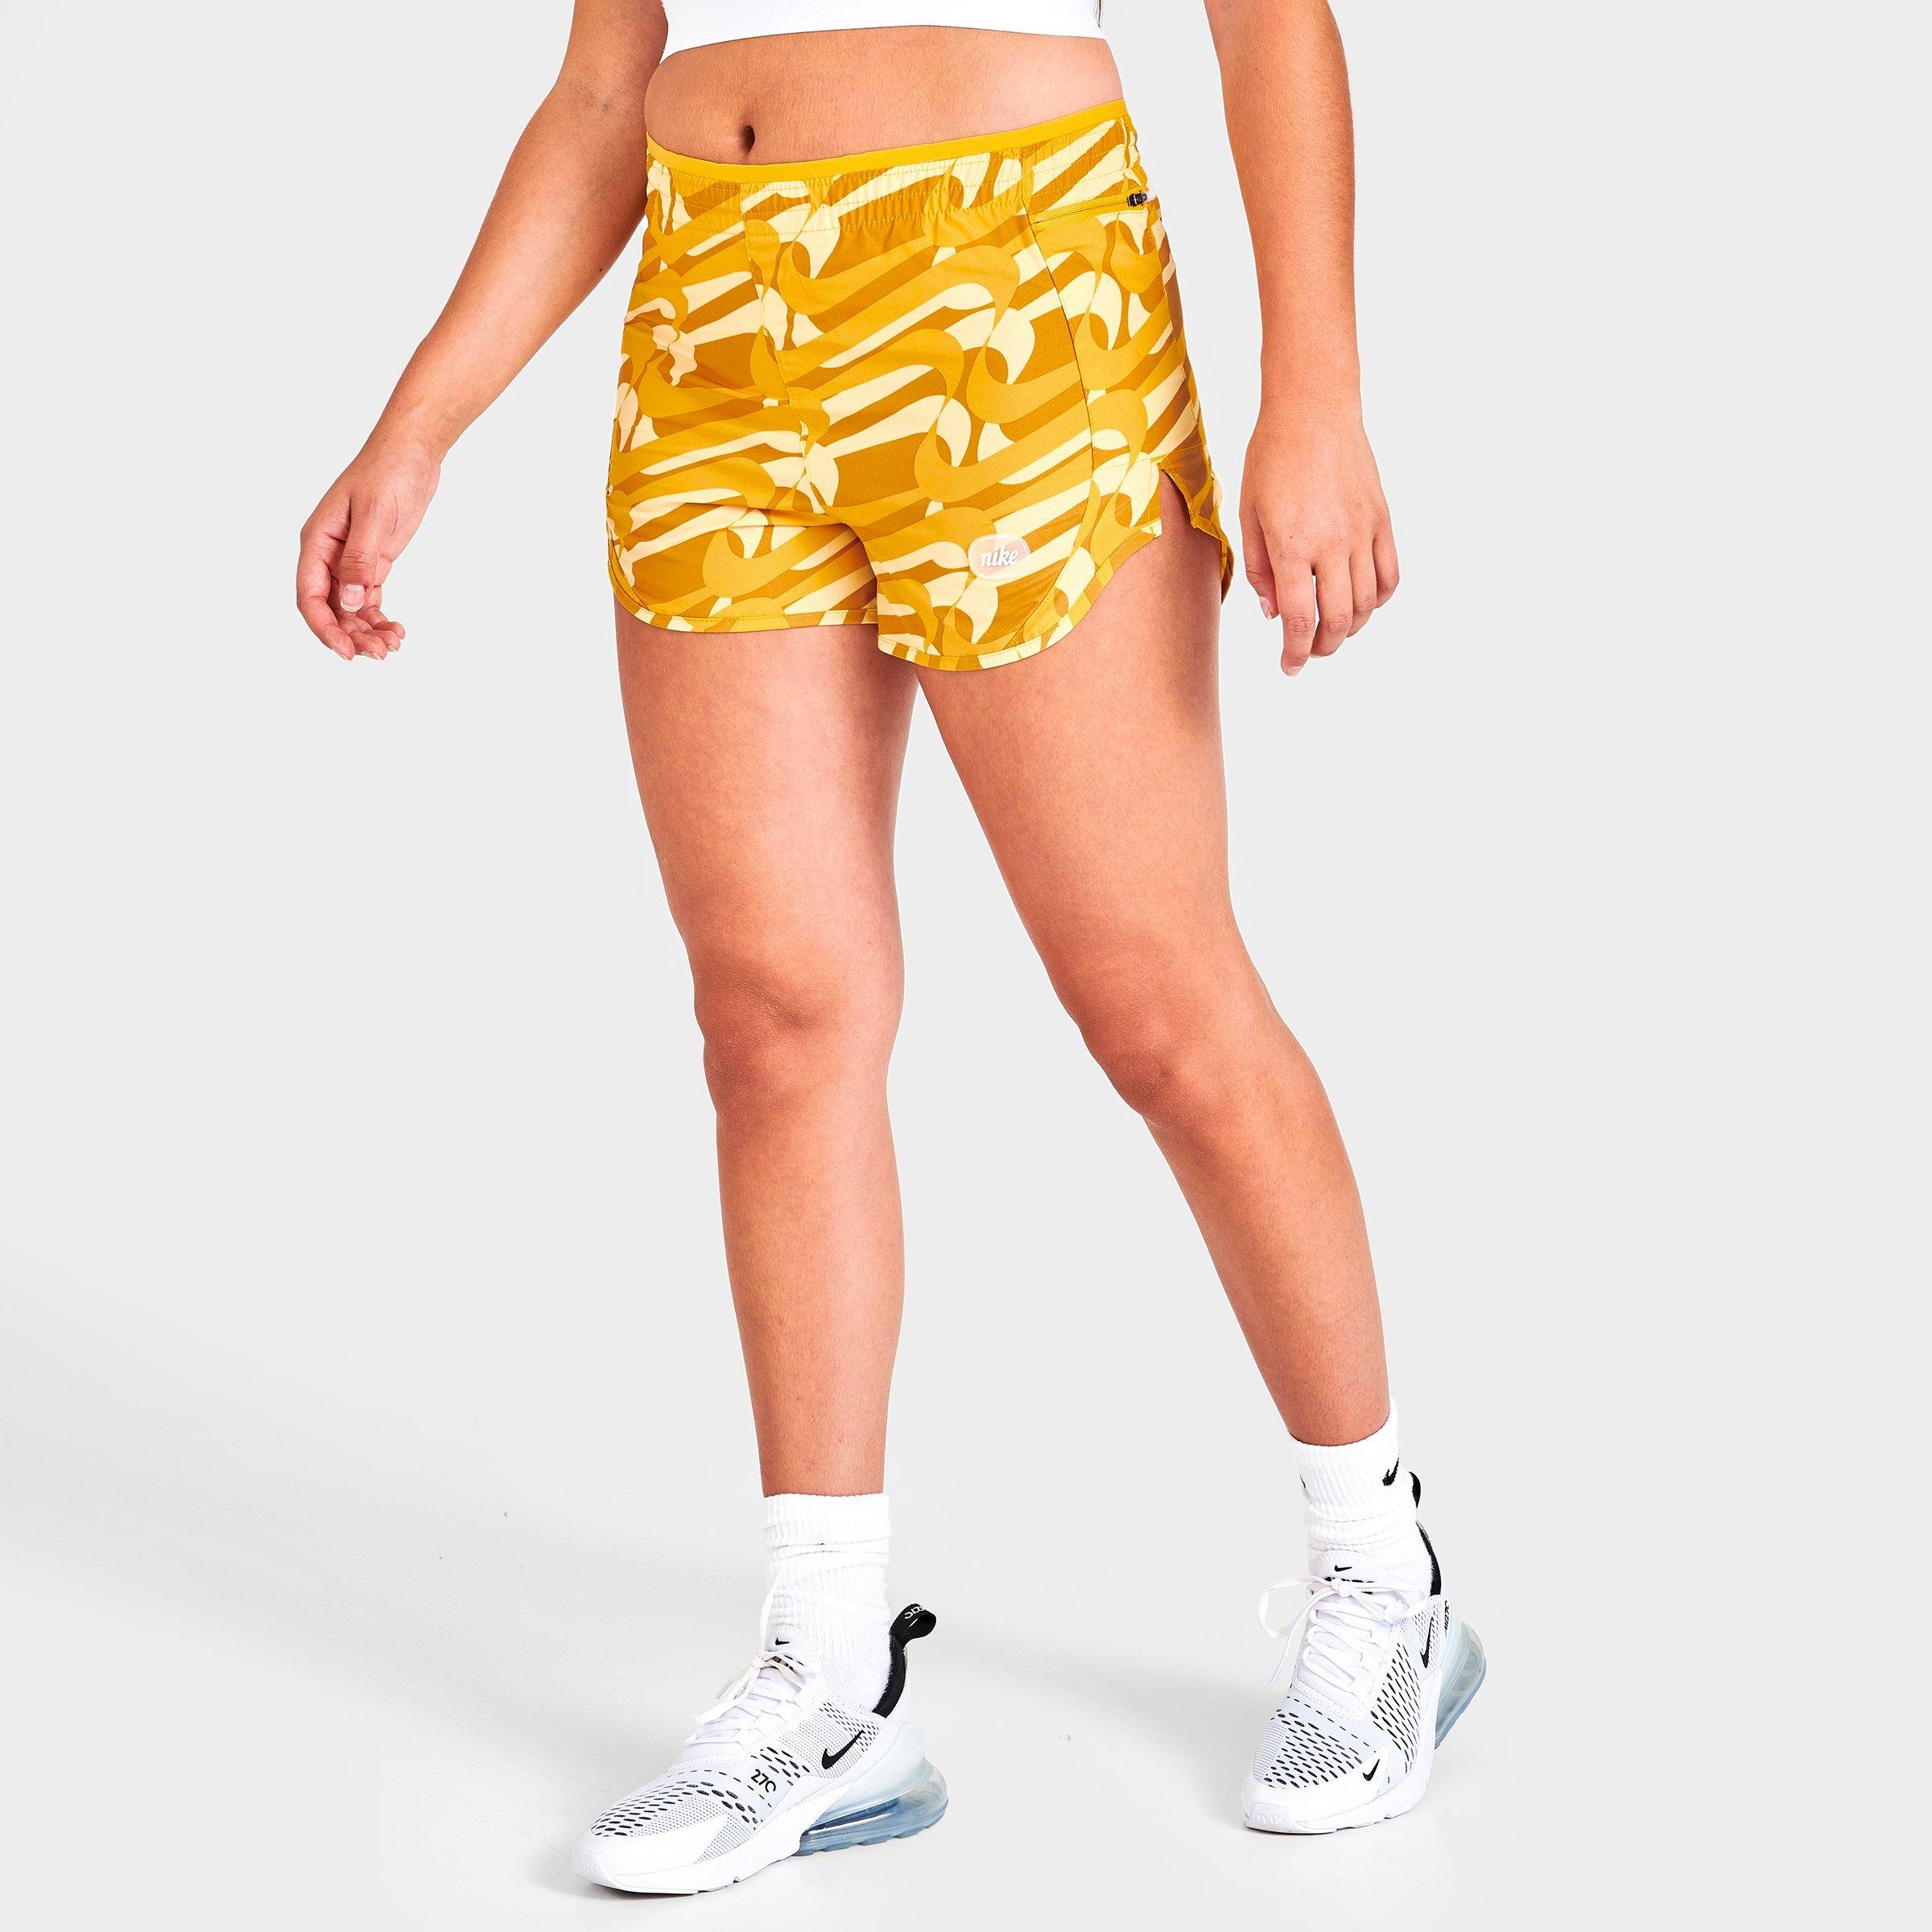 UPC 196149000107 product image for Nike Women's Dri-FIT Icon Clash Tempo Luxe Printed Running Shorts in Yellow/Yell | upcitemdb.com